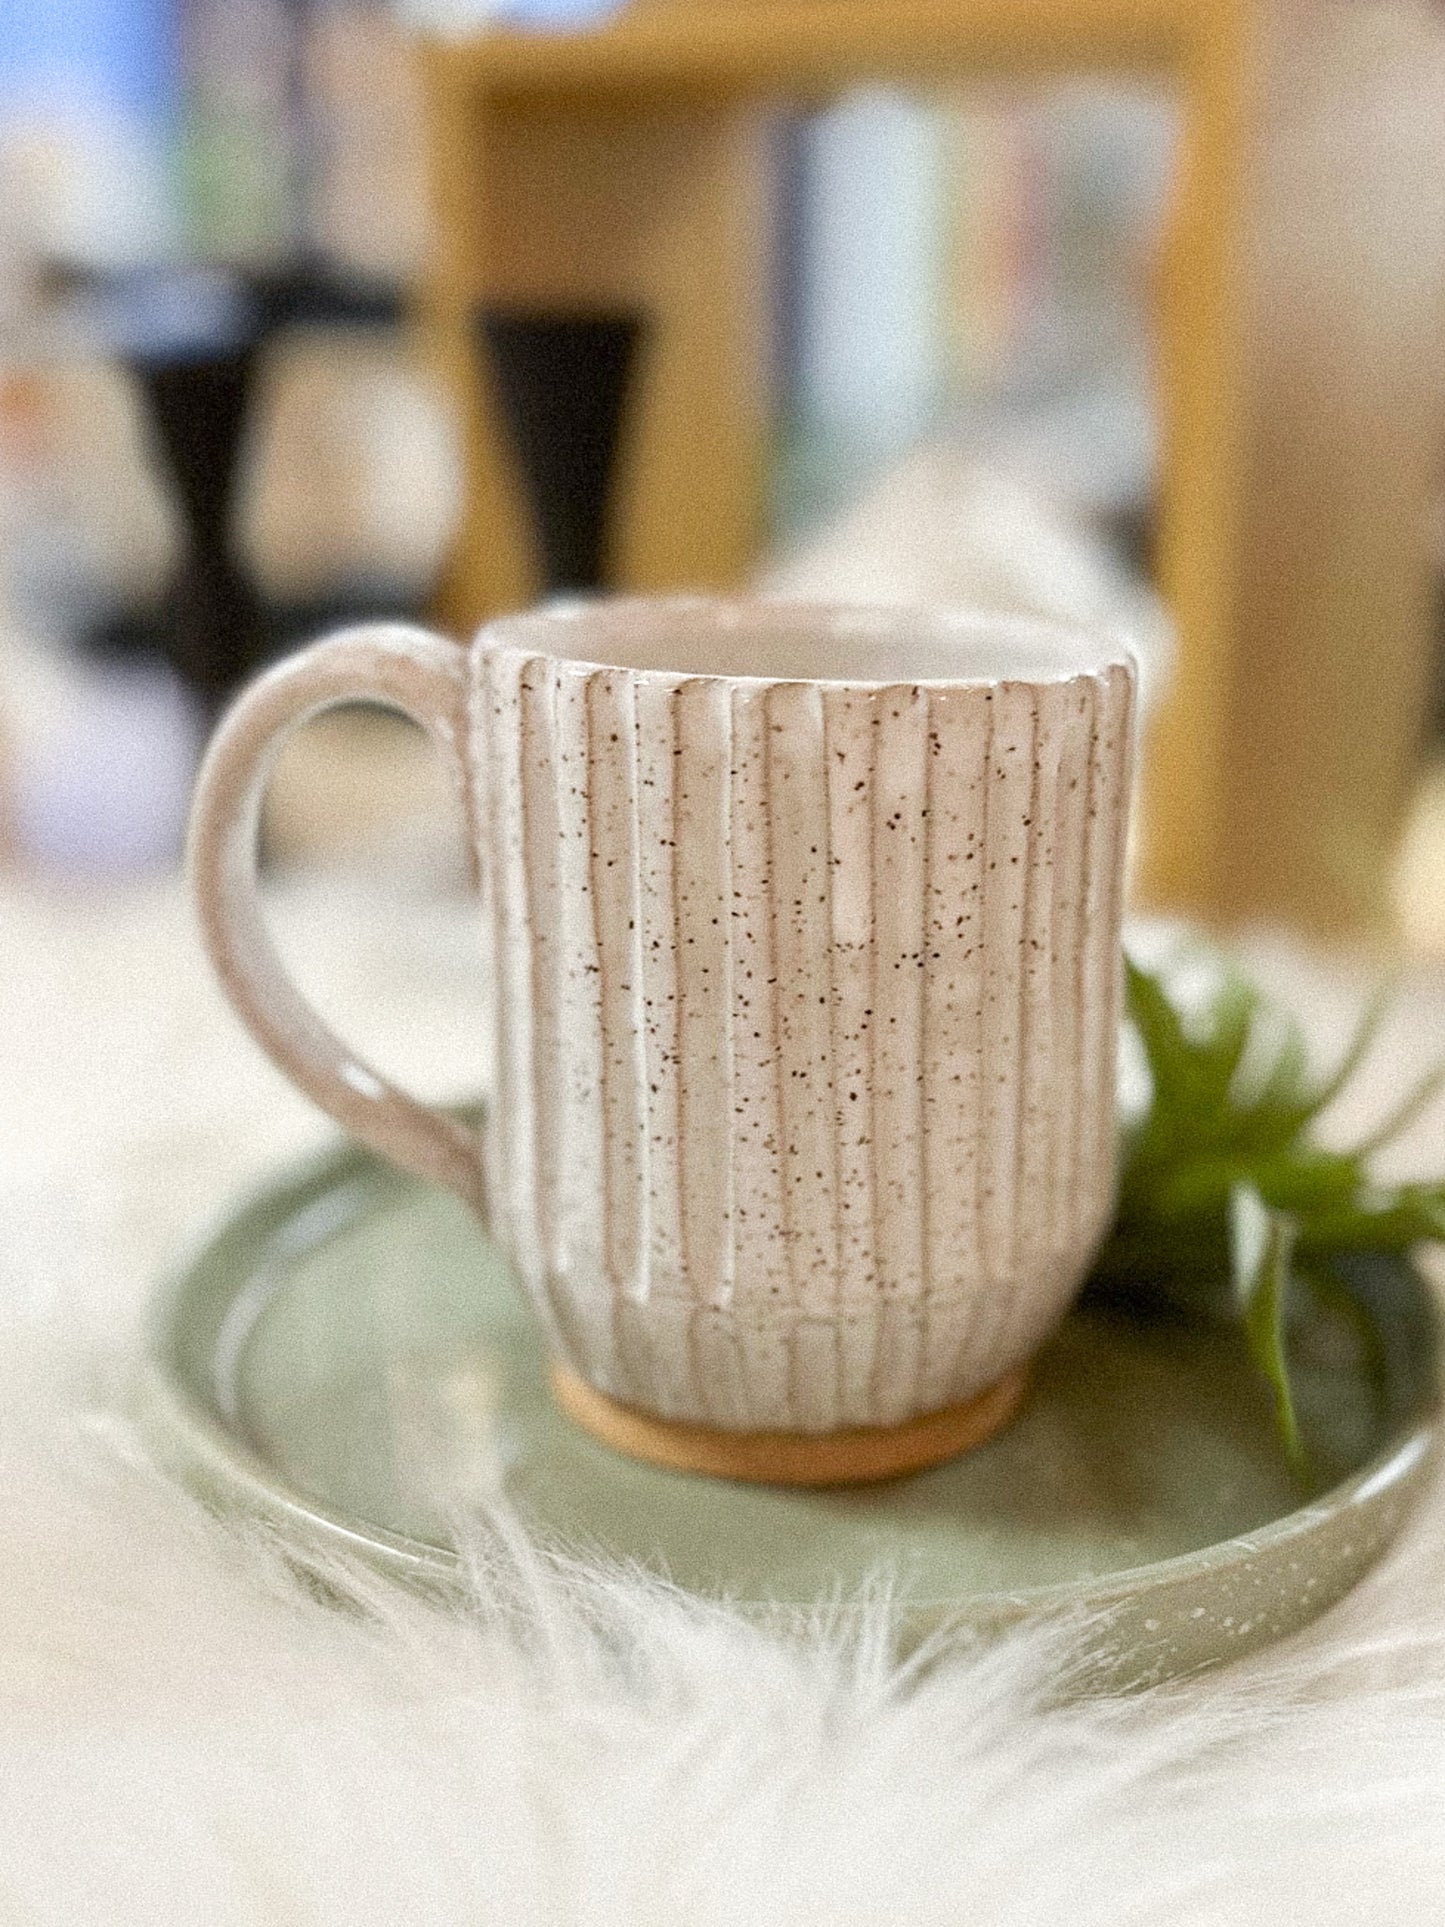 Carved Vertical Stripes Mug by Night School Knits and Pots #29